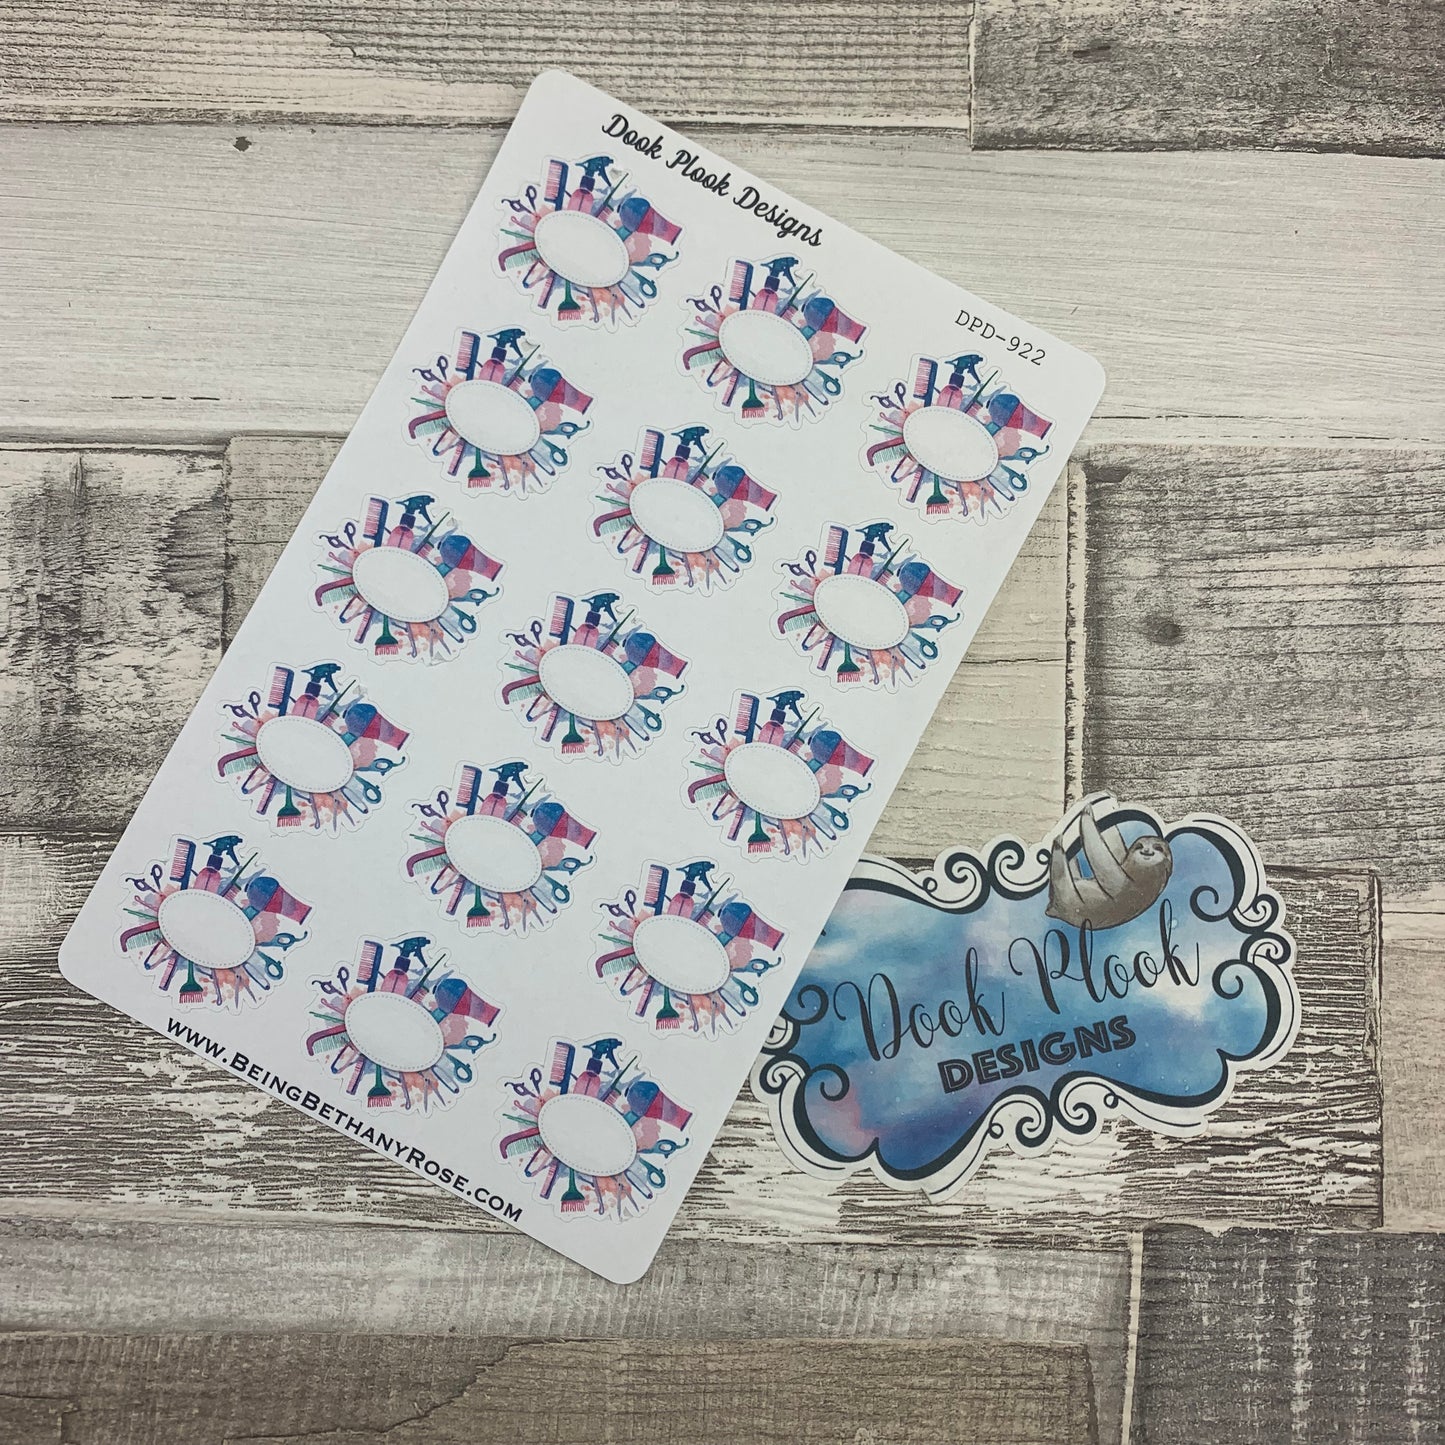 Water colour hairdressers stickers (DPD922)